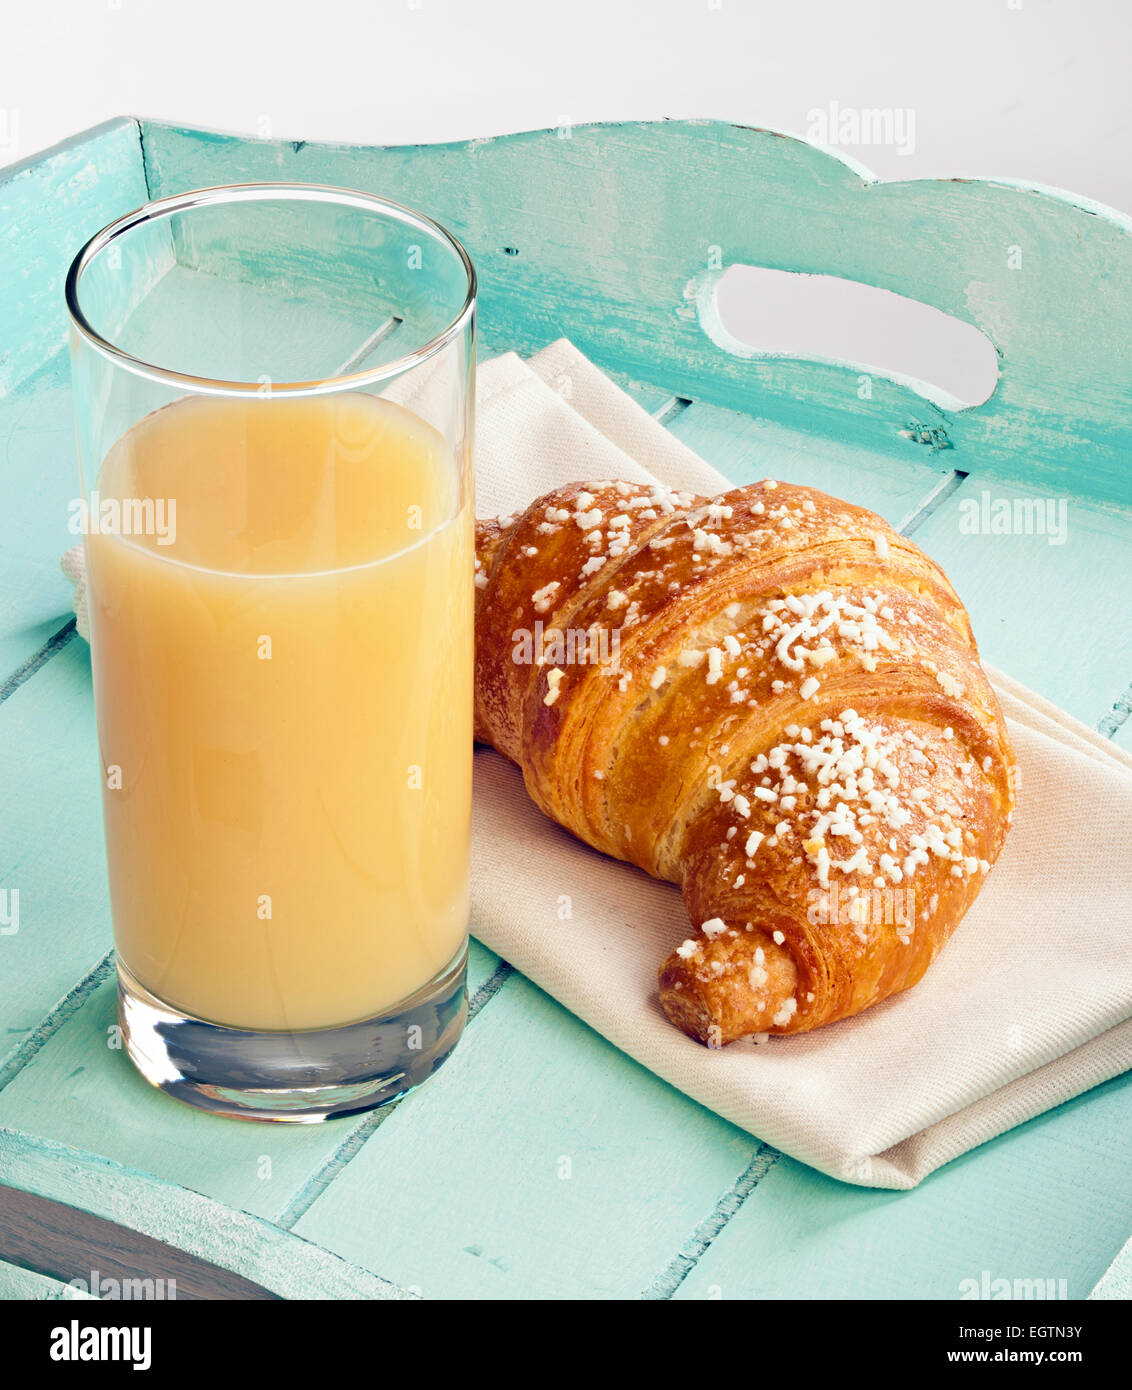 Croissant and pear juice on light blue tray. Stock Photo